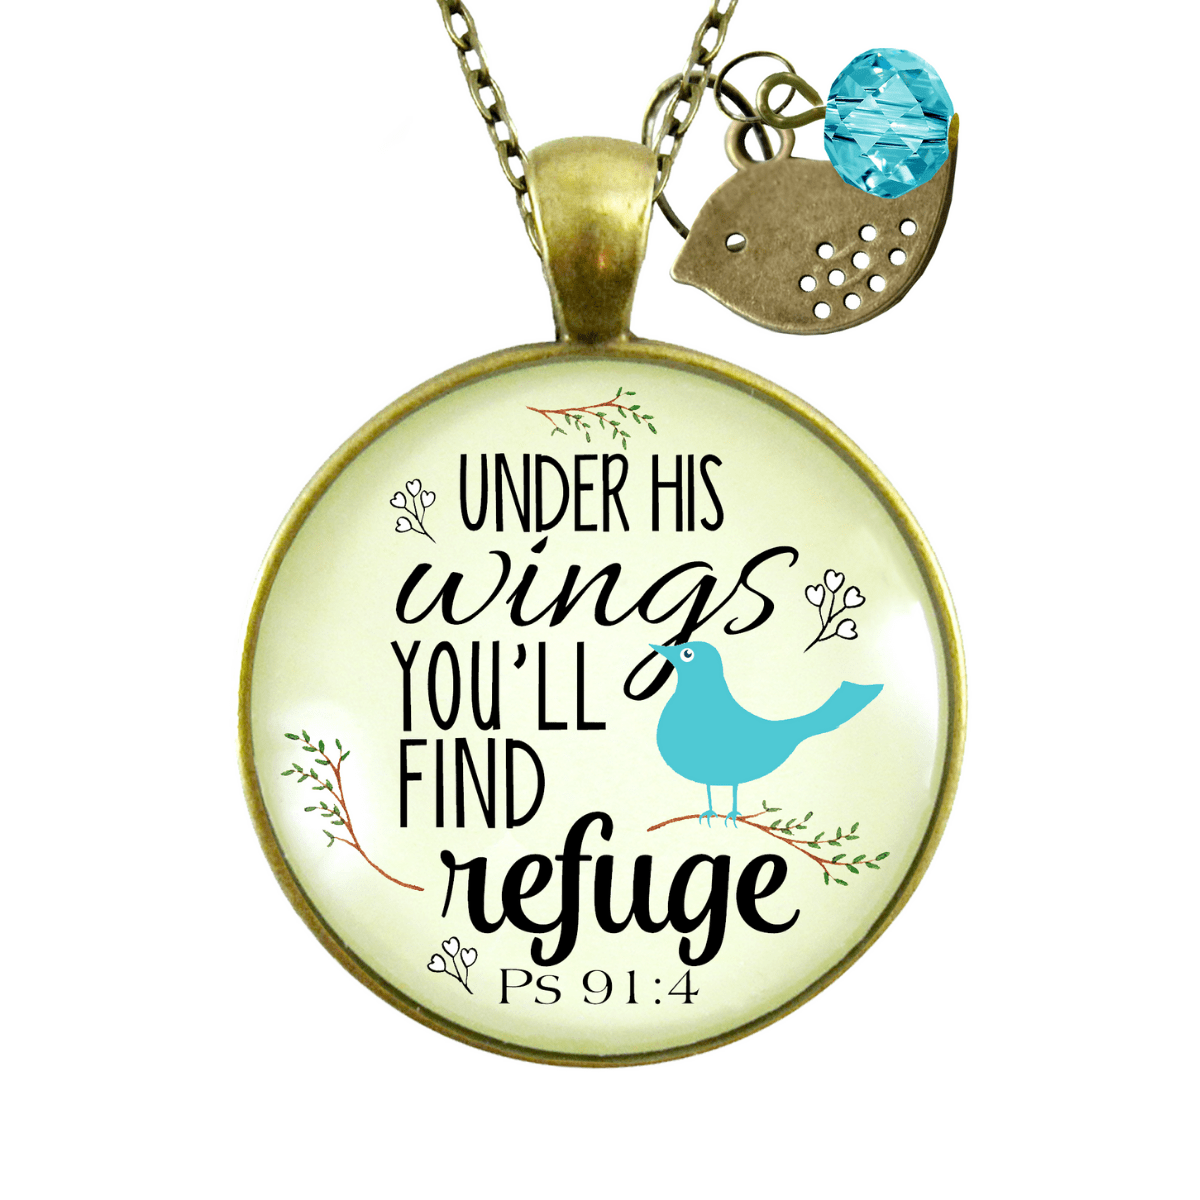 Gutsy Goodness Bible Quote Necklace Under His Wings Refuge Psalm 91 Promise Jewelry - Gutsy Goodness Handmade Jewelry;Bible Quote Necklace Under His Wings Refuge Psalm 91 Promise Jewelry - Gutsy Goodness Handmade Jewelry Gifts